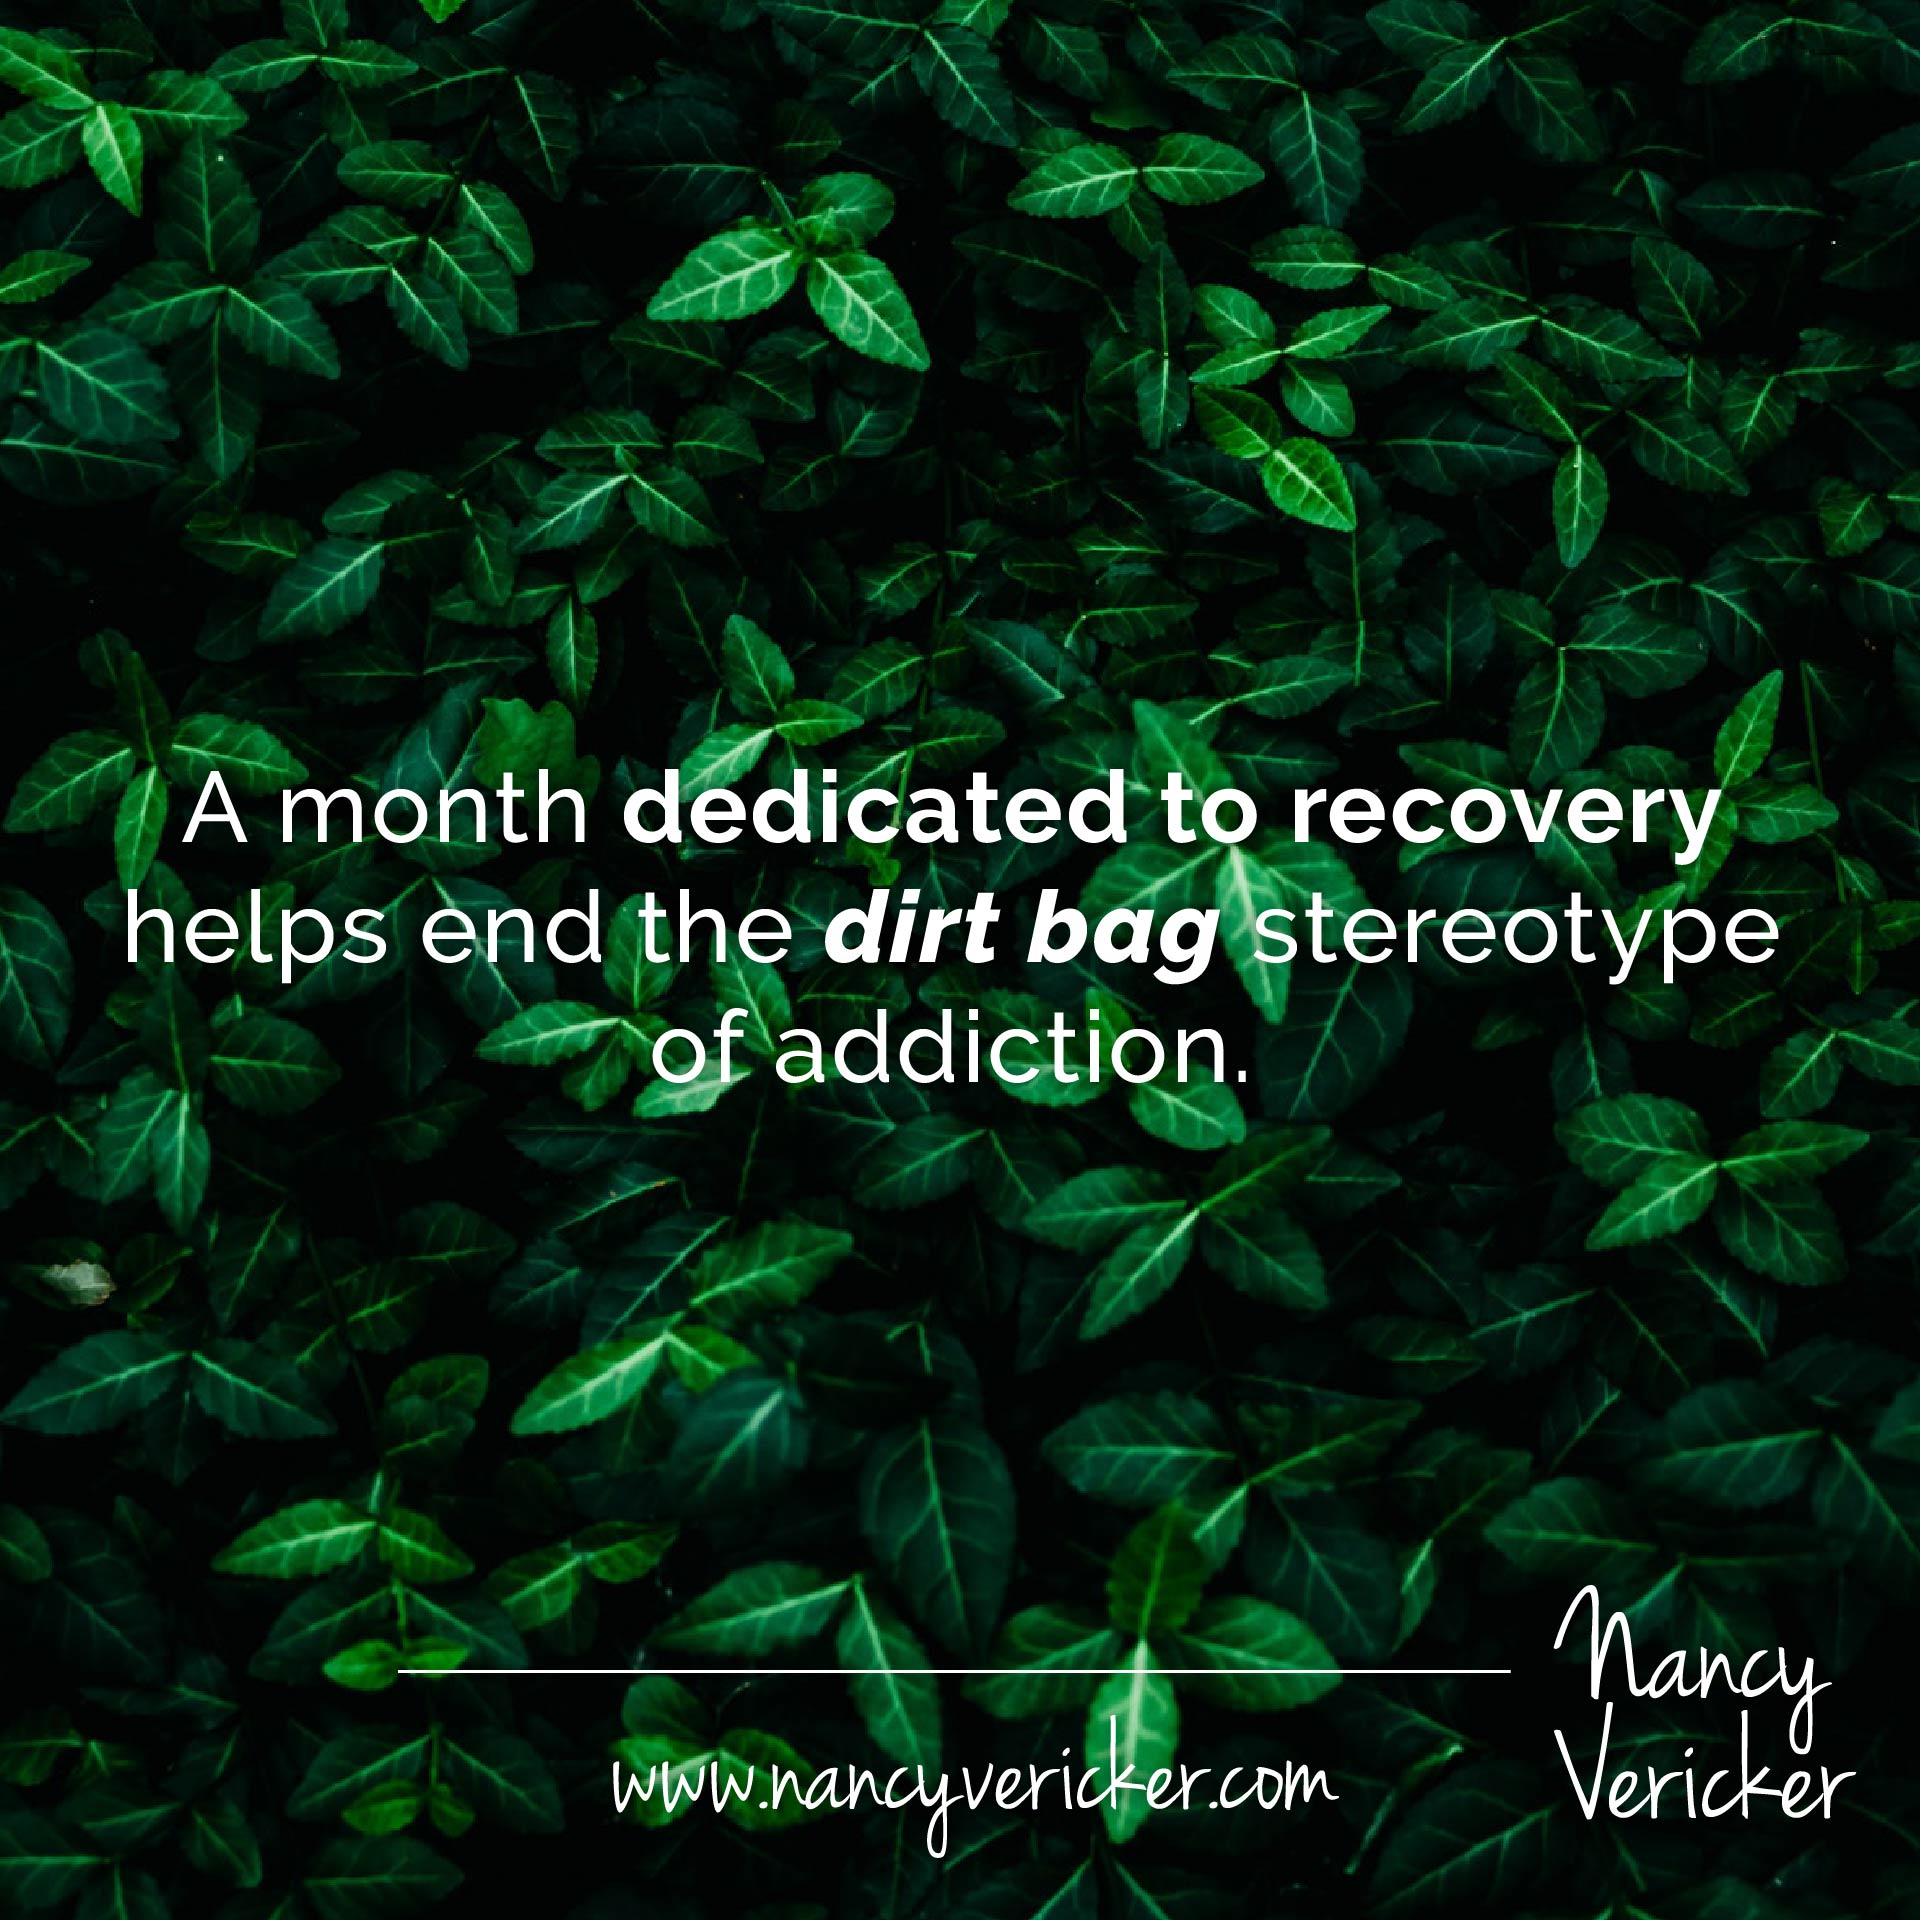 NATIONAL RECOVERY MONTH: STOPPING THE “DIRT BAG” STEREOTYPE – Nancy Vericker